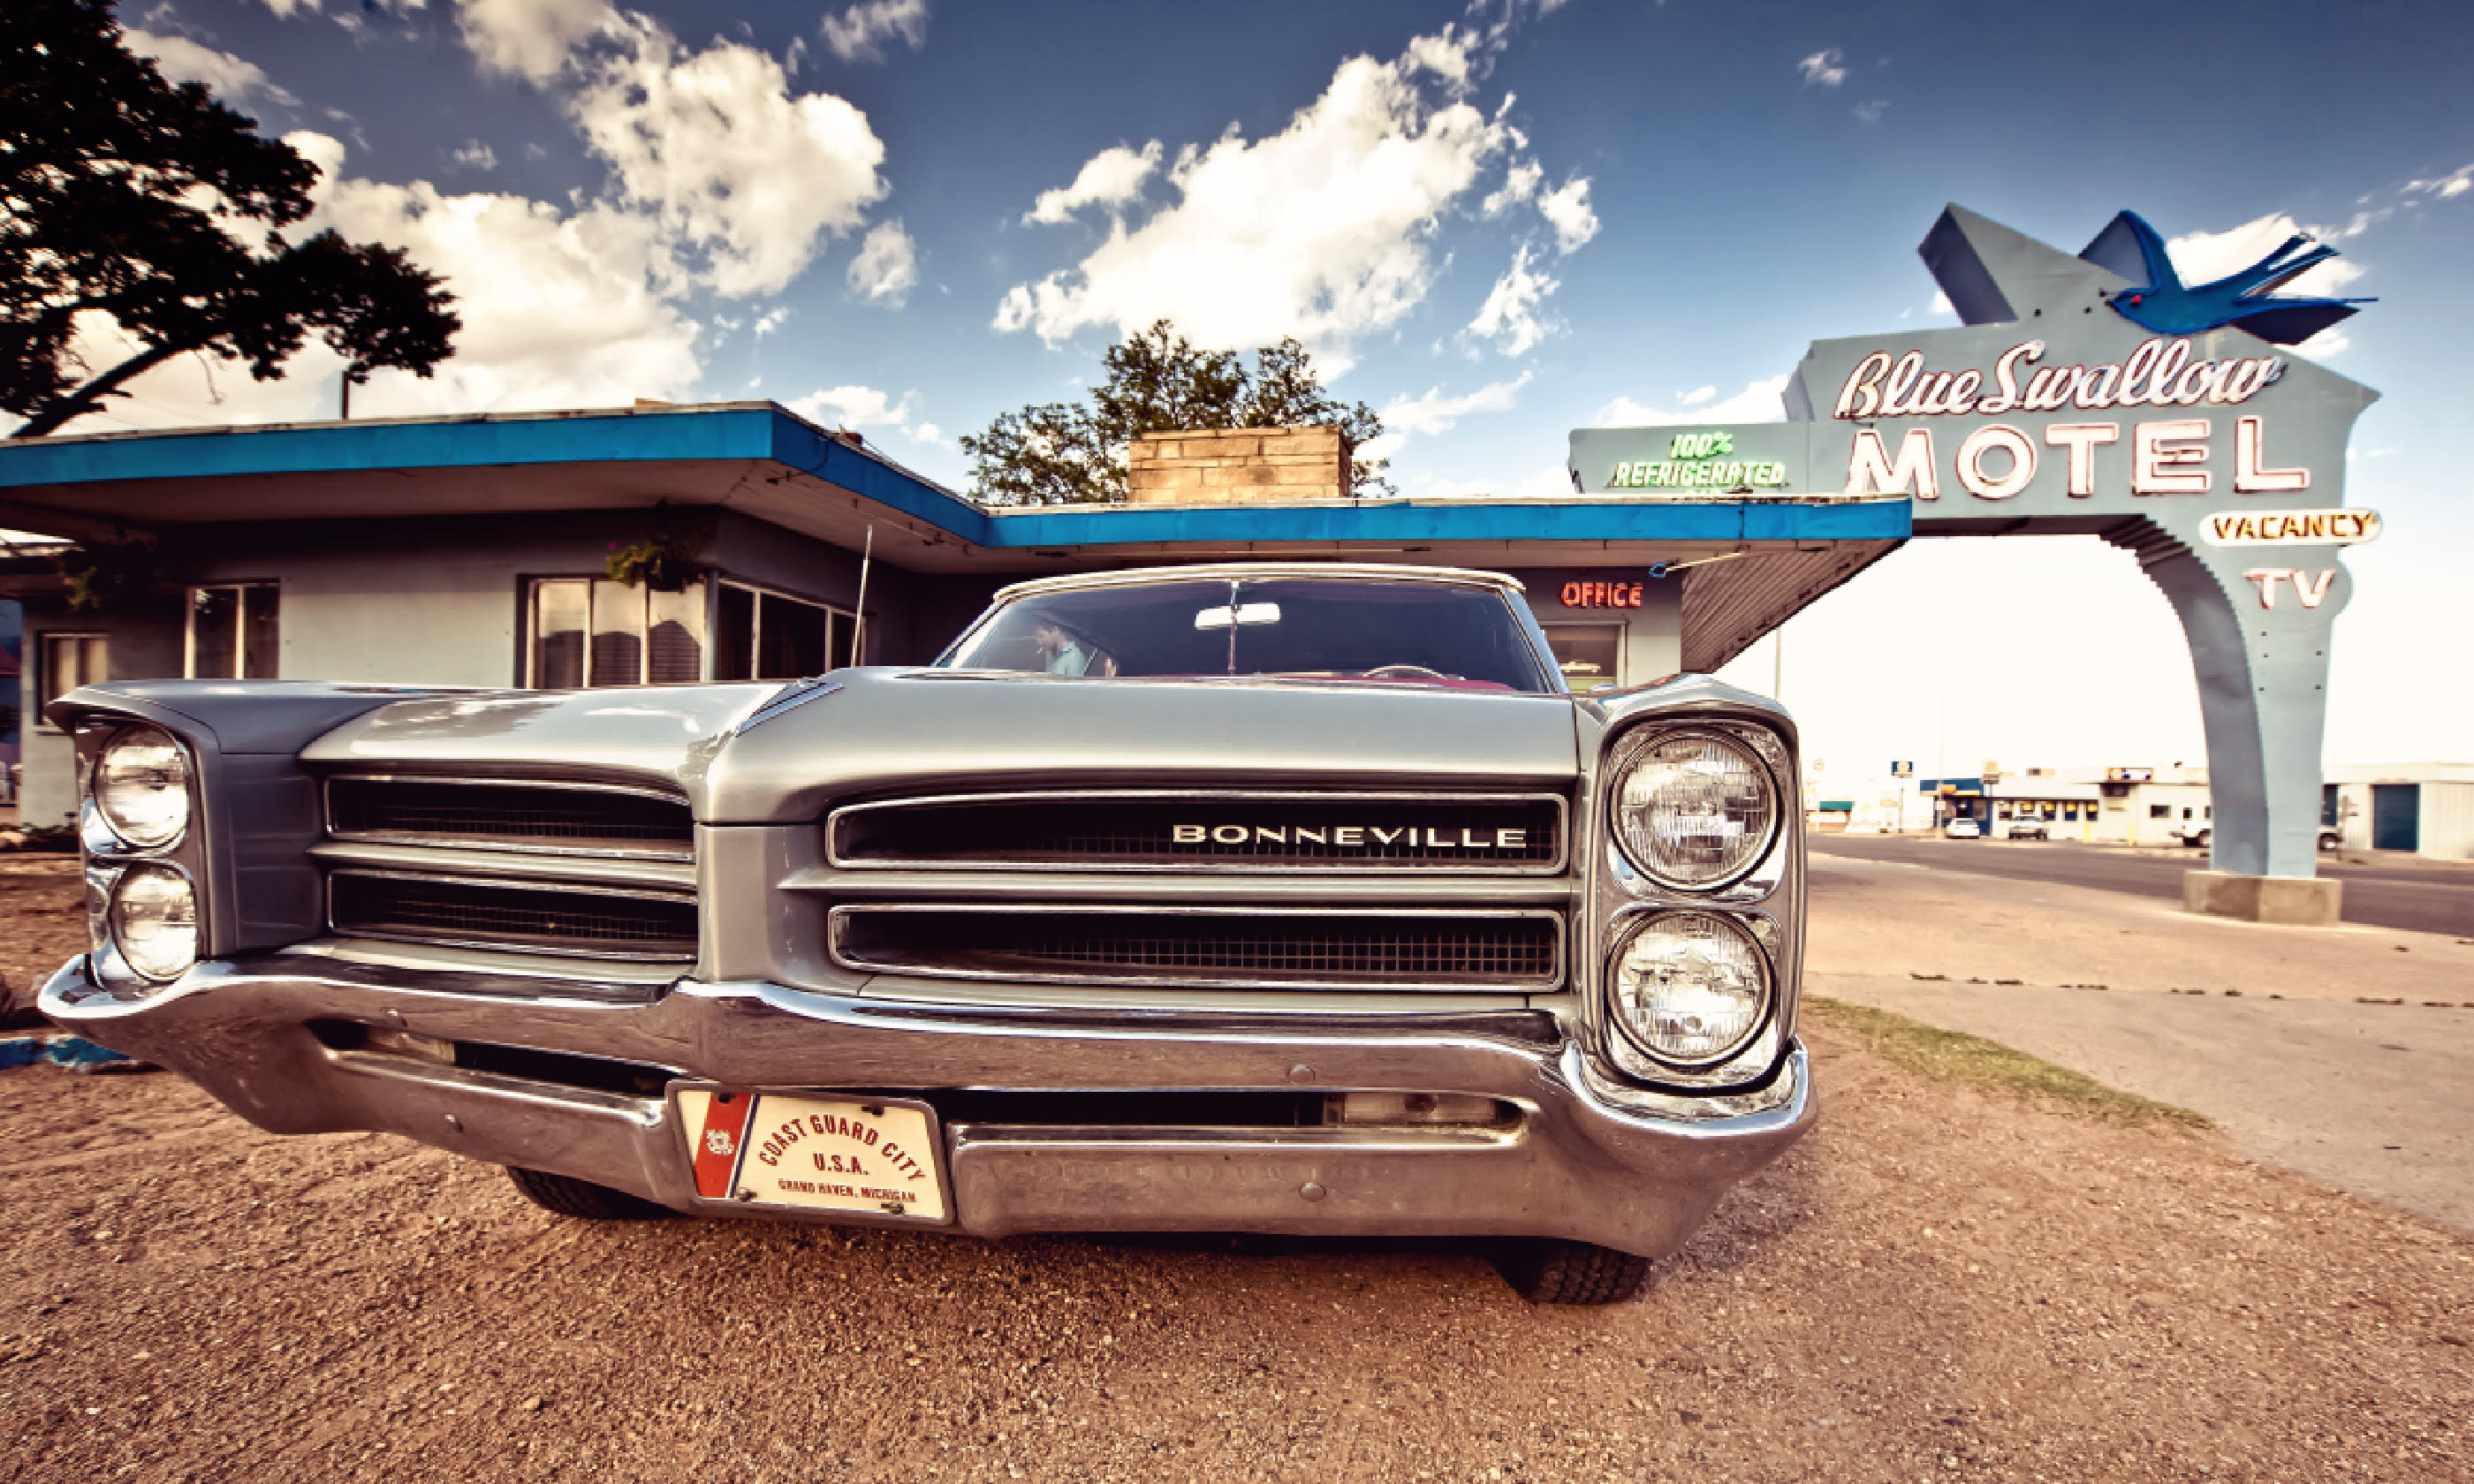 Blue Swallow Motel and old car on Historic Route 66 (Shutterstock)